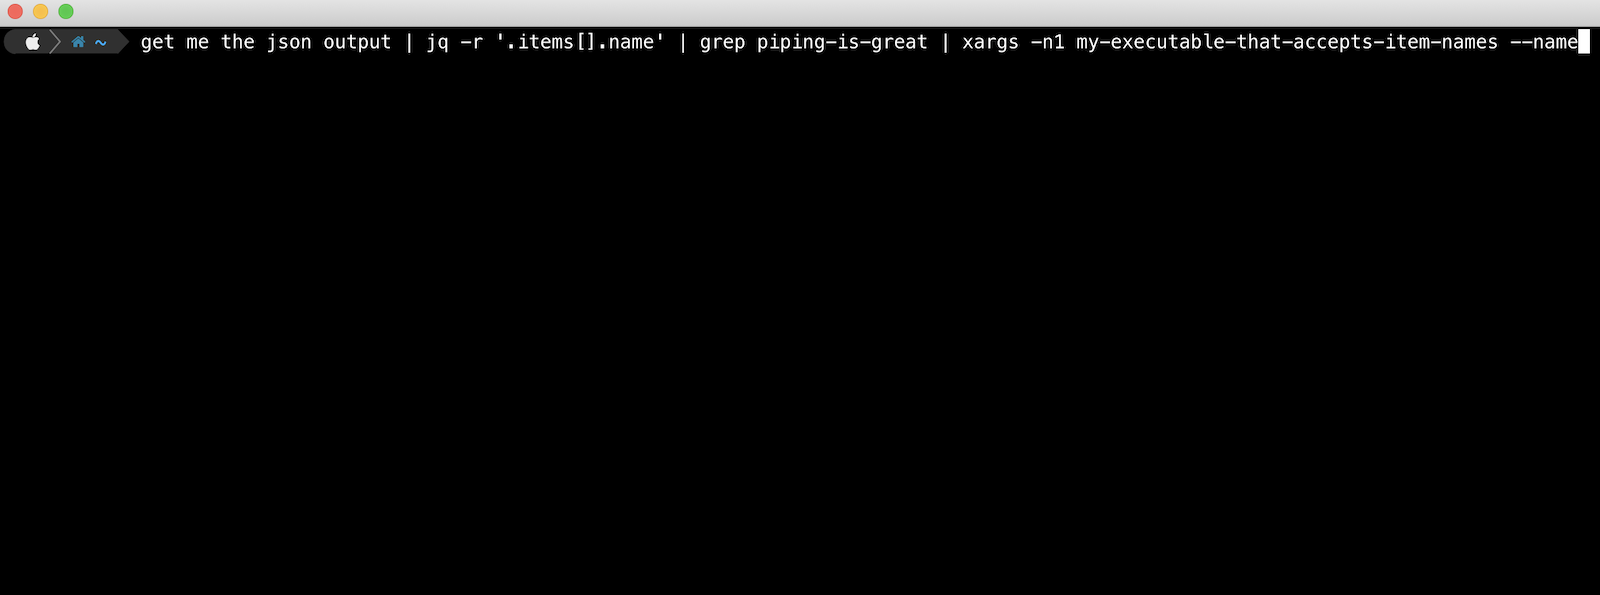 select-match-and-pipe-output-with-jq-grep-xargs